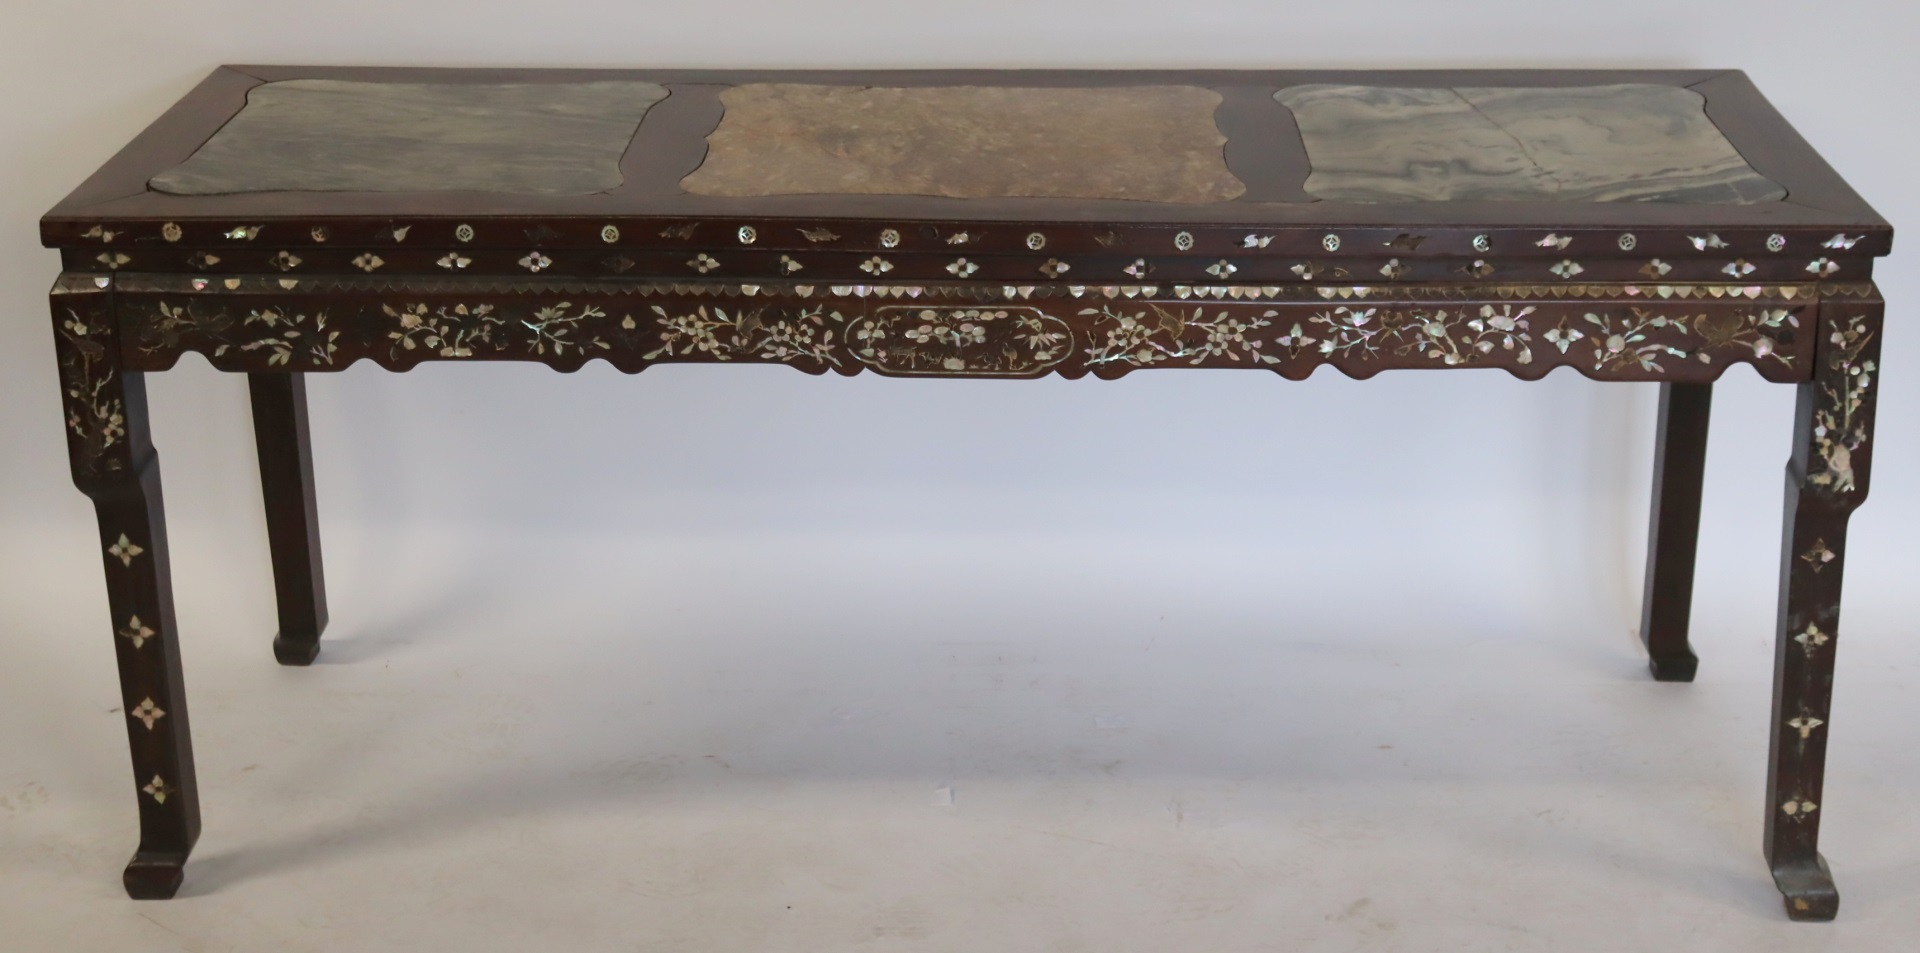 ANTIQUE INLAID HARD WOOD TABLE.